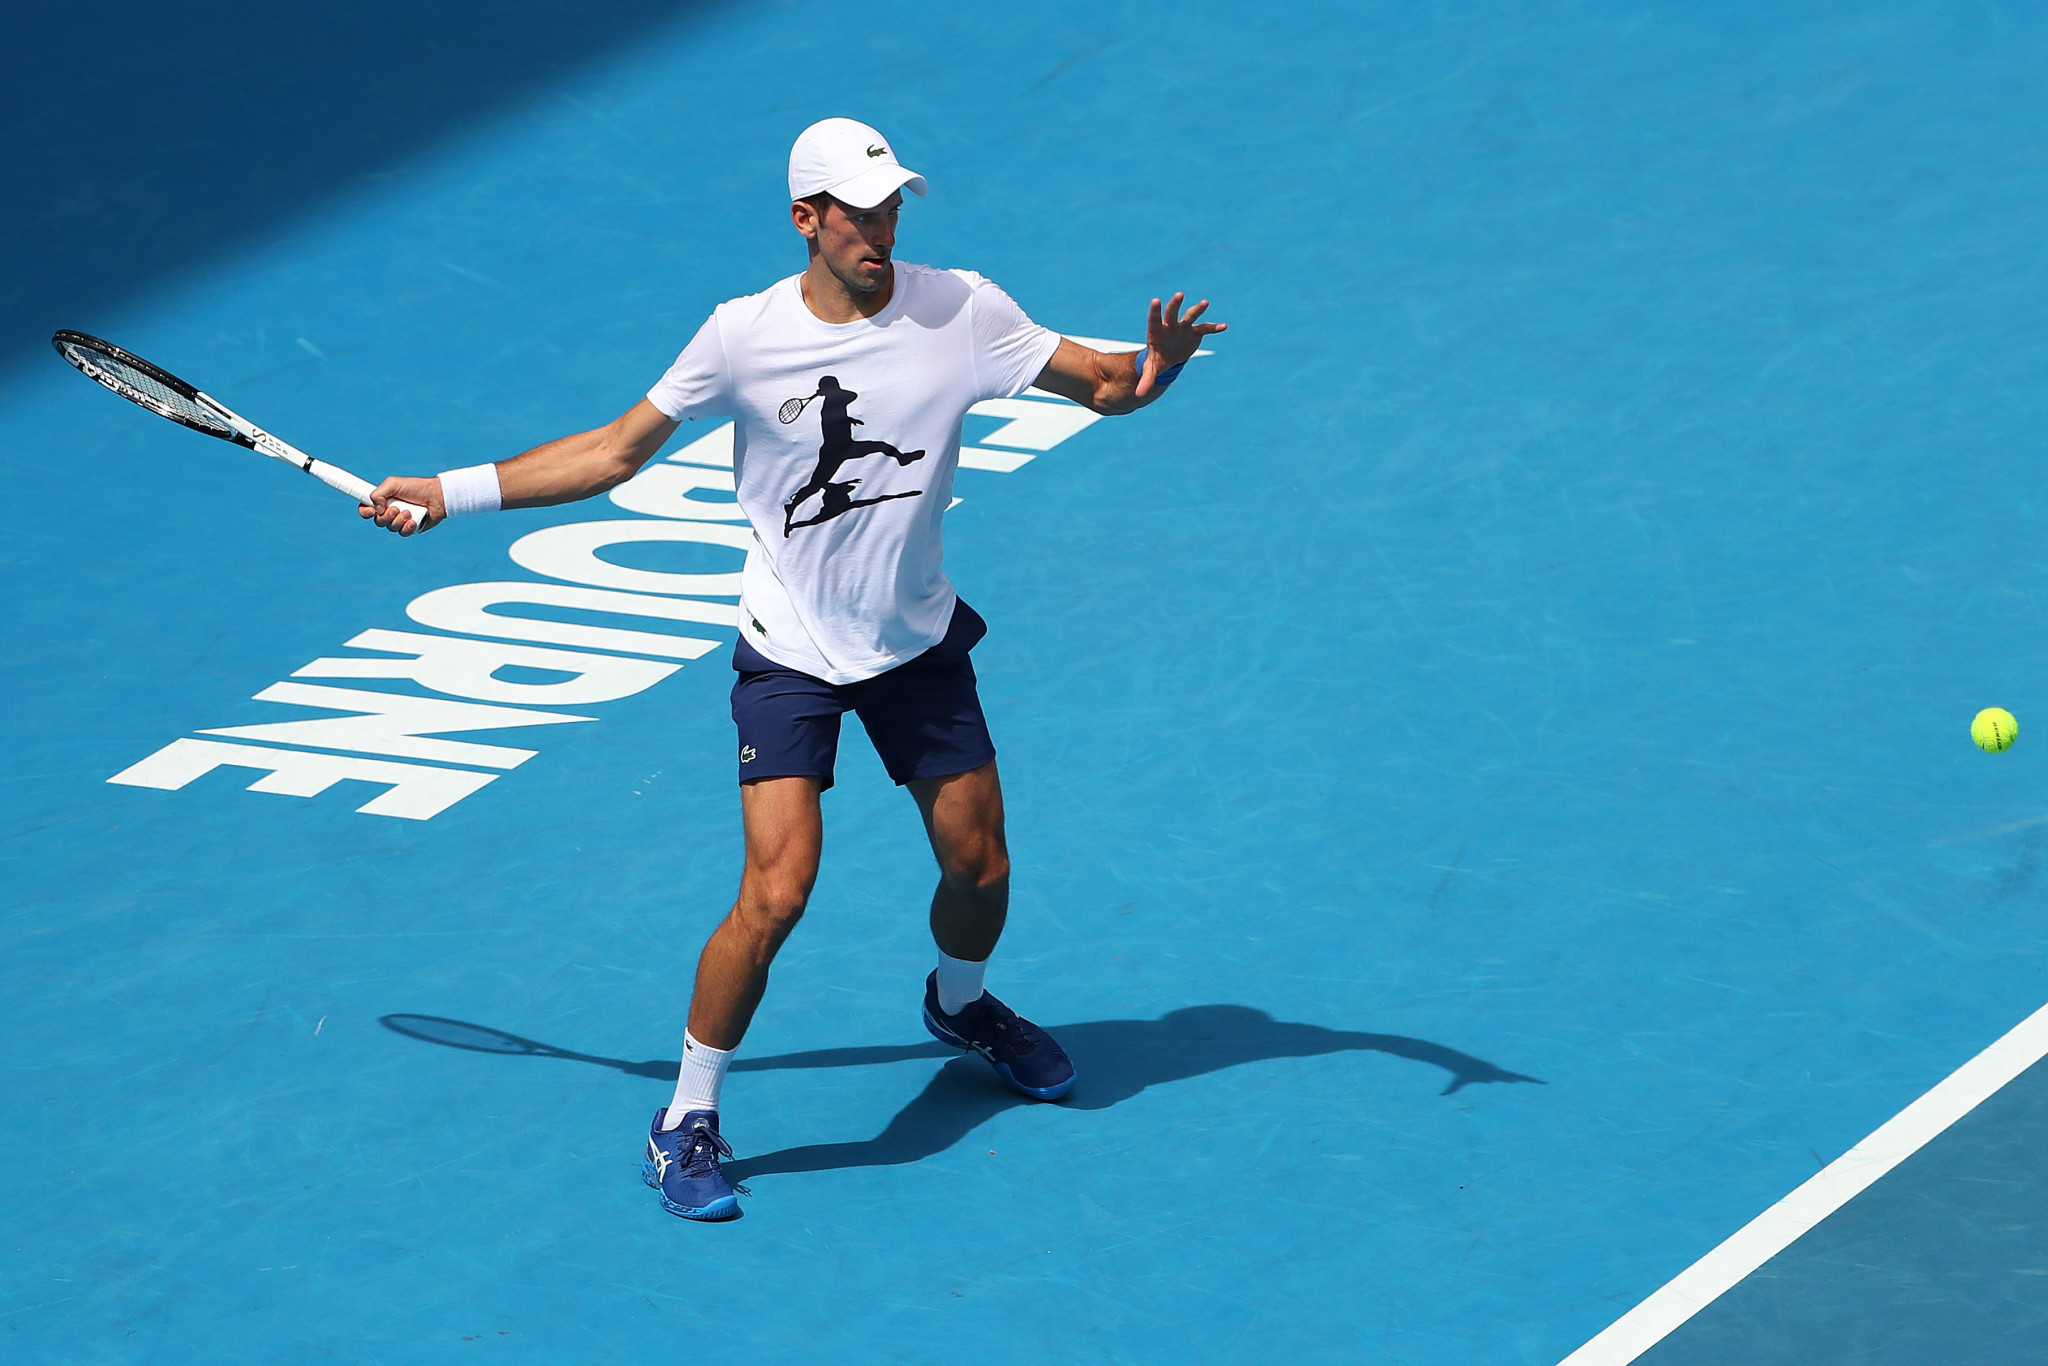 Novak Djokovic practices on Rod Laver Arena prior to the Australian Open after winning his appeal hearing ©Getty Images